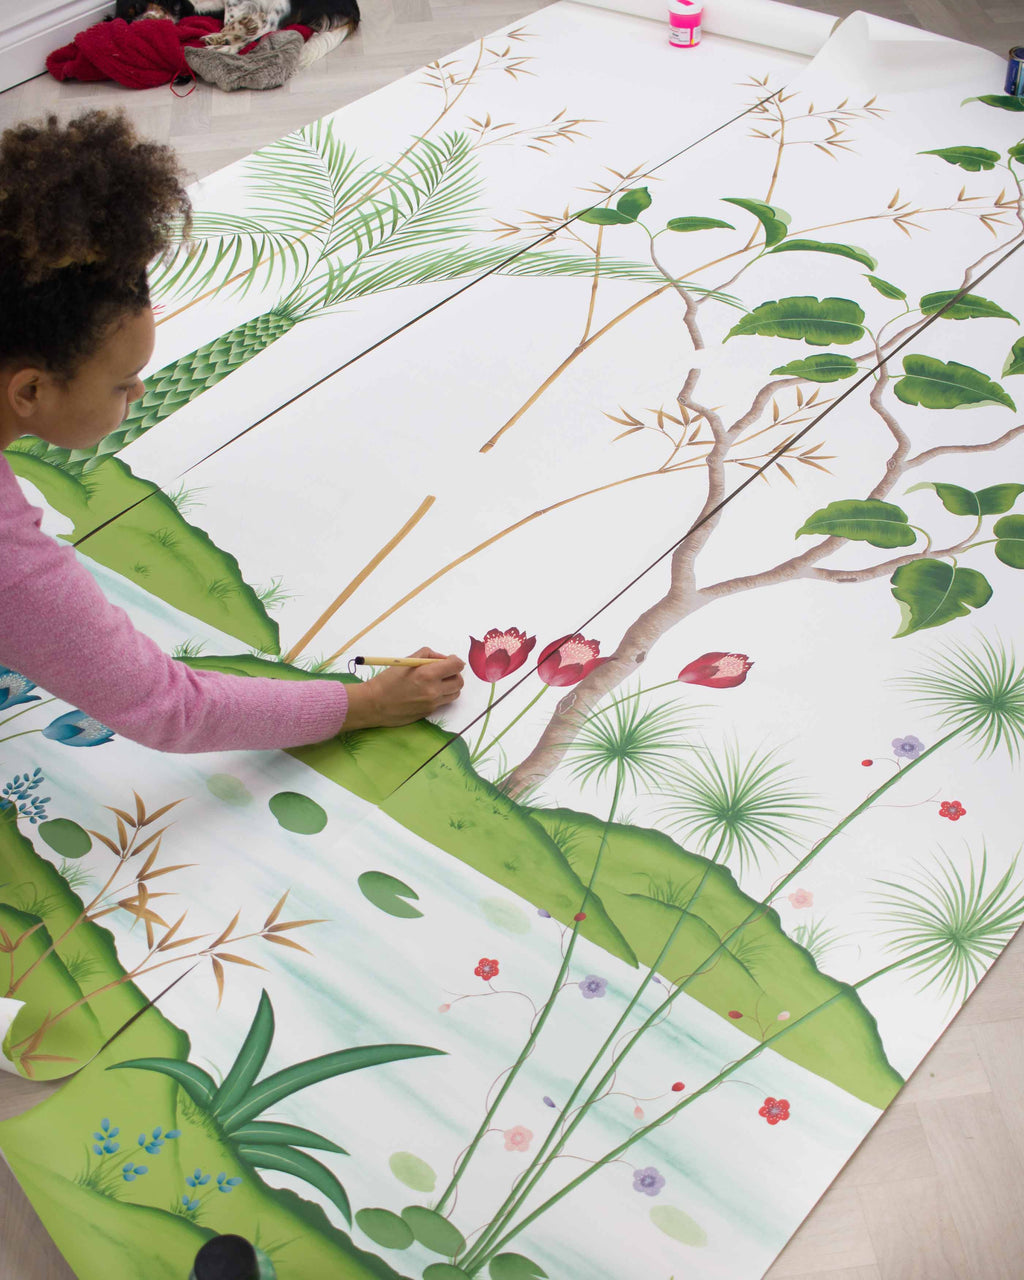 Composing a stunning design created exclusively for Osborne & Little for their Empyrea range, featuring blue herons, palm trees and rambling botanicals. Mirage has been designed exclusively for Osborne & Little by Diane Hill and Joanna Charlotte.